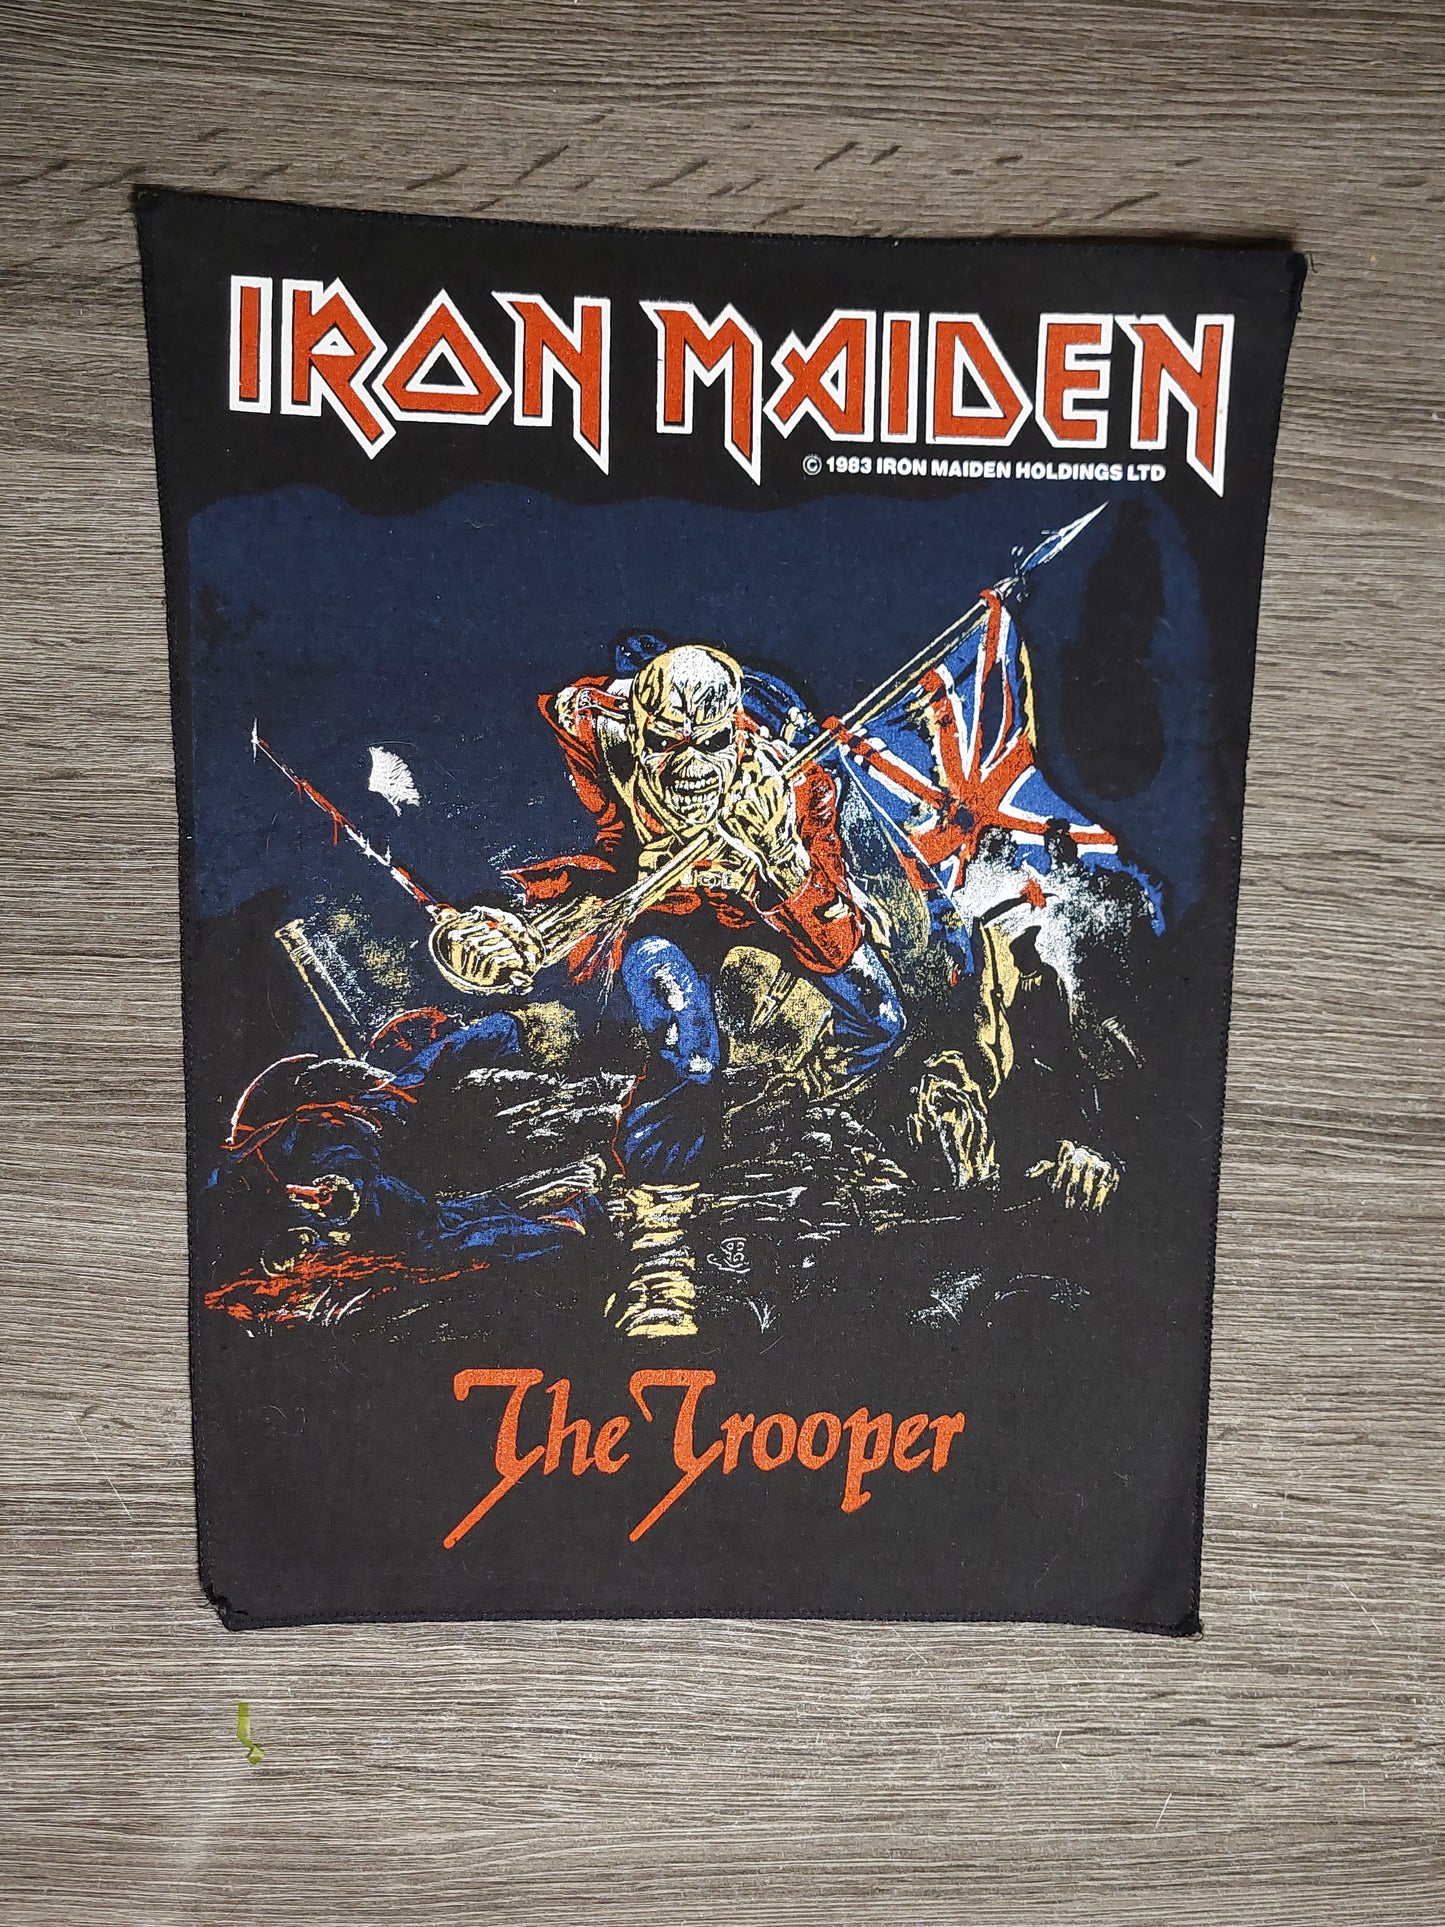 Iron maiden - The Trooper backpatch